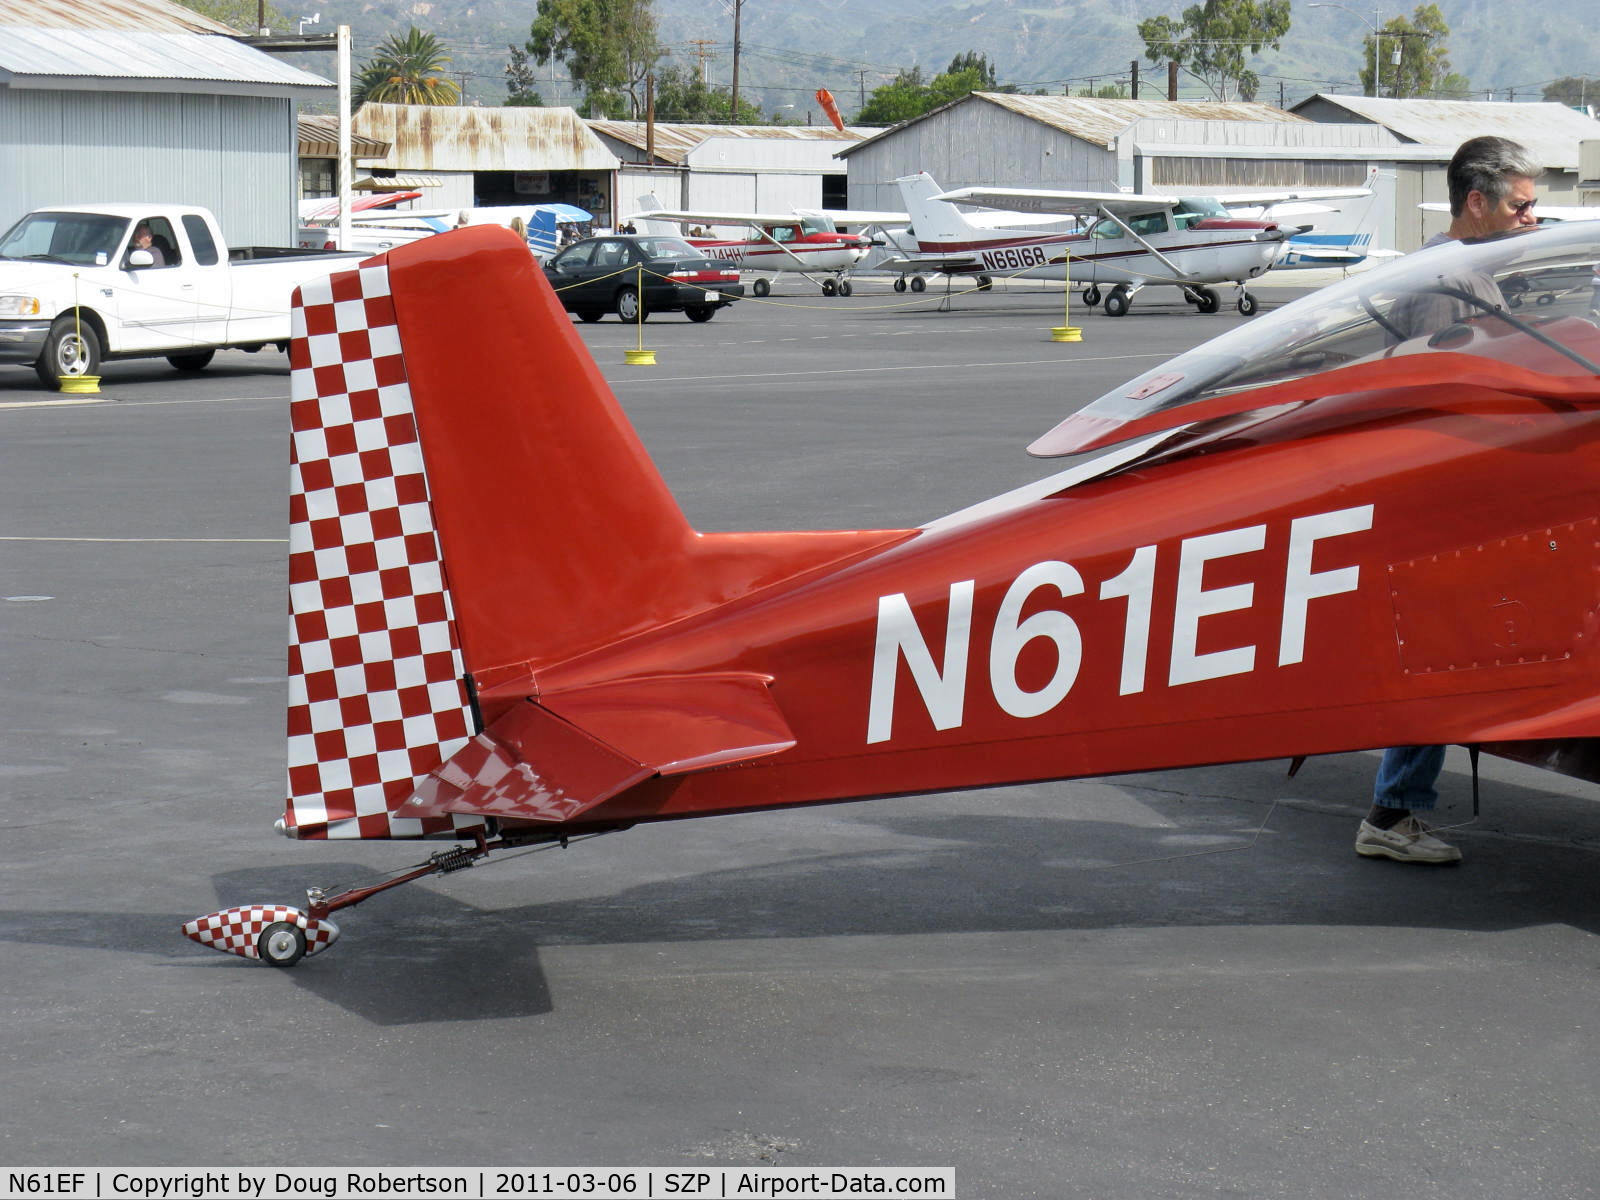 N61EF, 1989 Bushby Mustang II C/N M-II-1019, 1989 Forisch BUSHBY M-II MUSTANG II, Lycoming O-320 160 Hp, tailwheel fairing typical of detail & precision of this stunning all-metal (plans-built, no kit) aircraft.